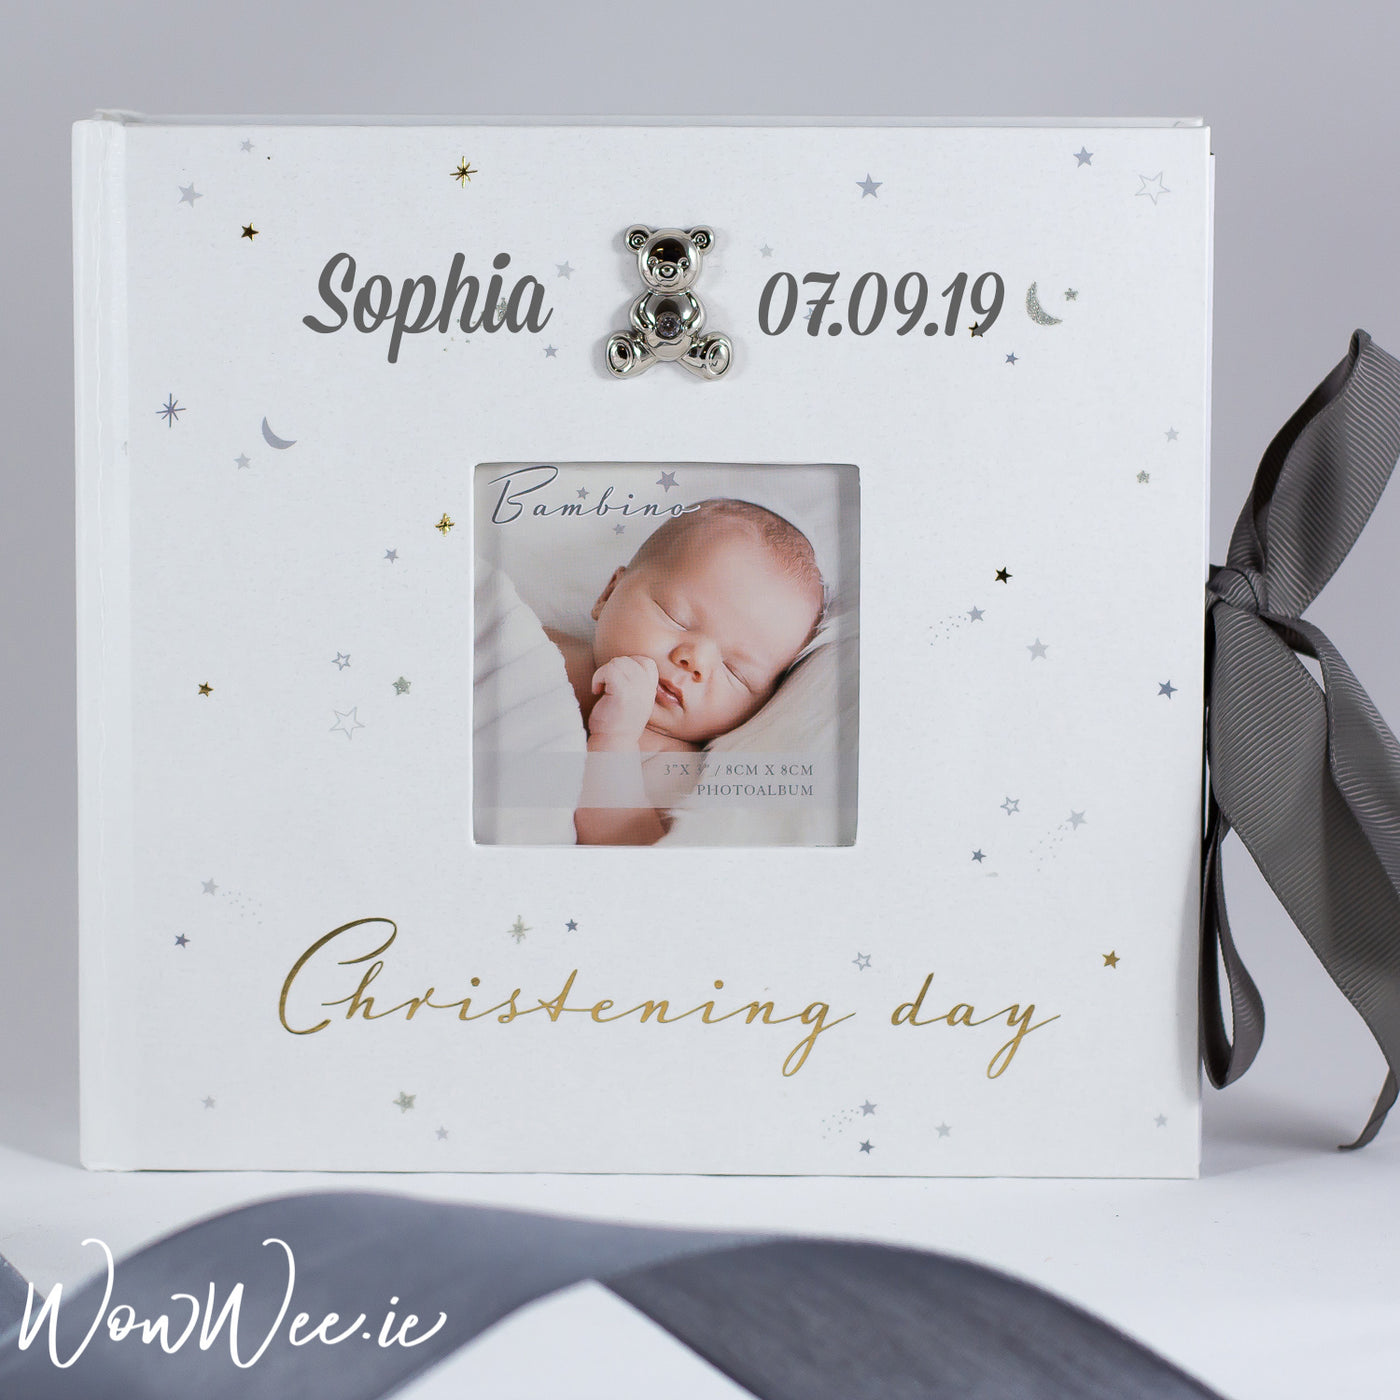 Personalised Christening Day Photo Album - WowWee.ie Personalised Gifts